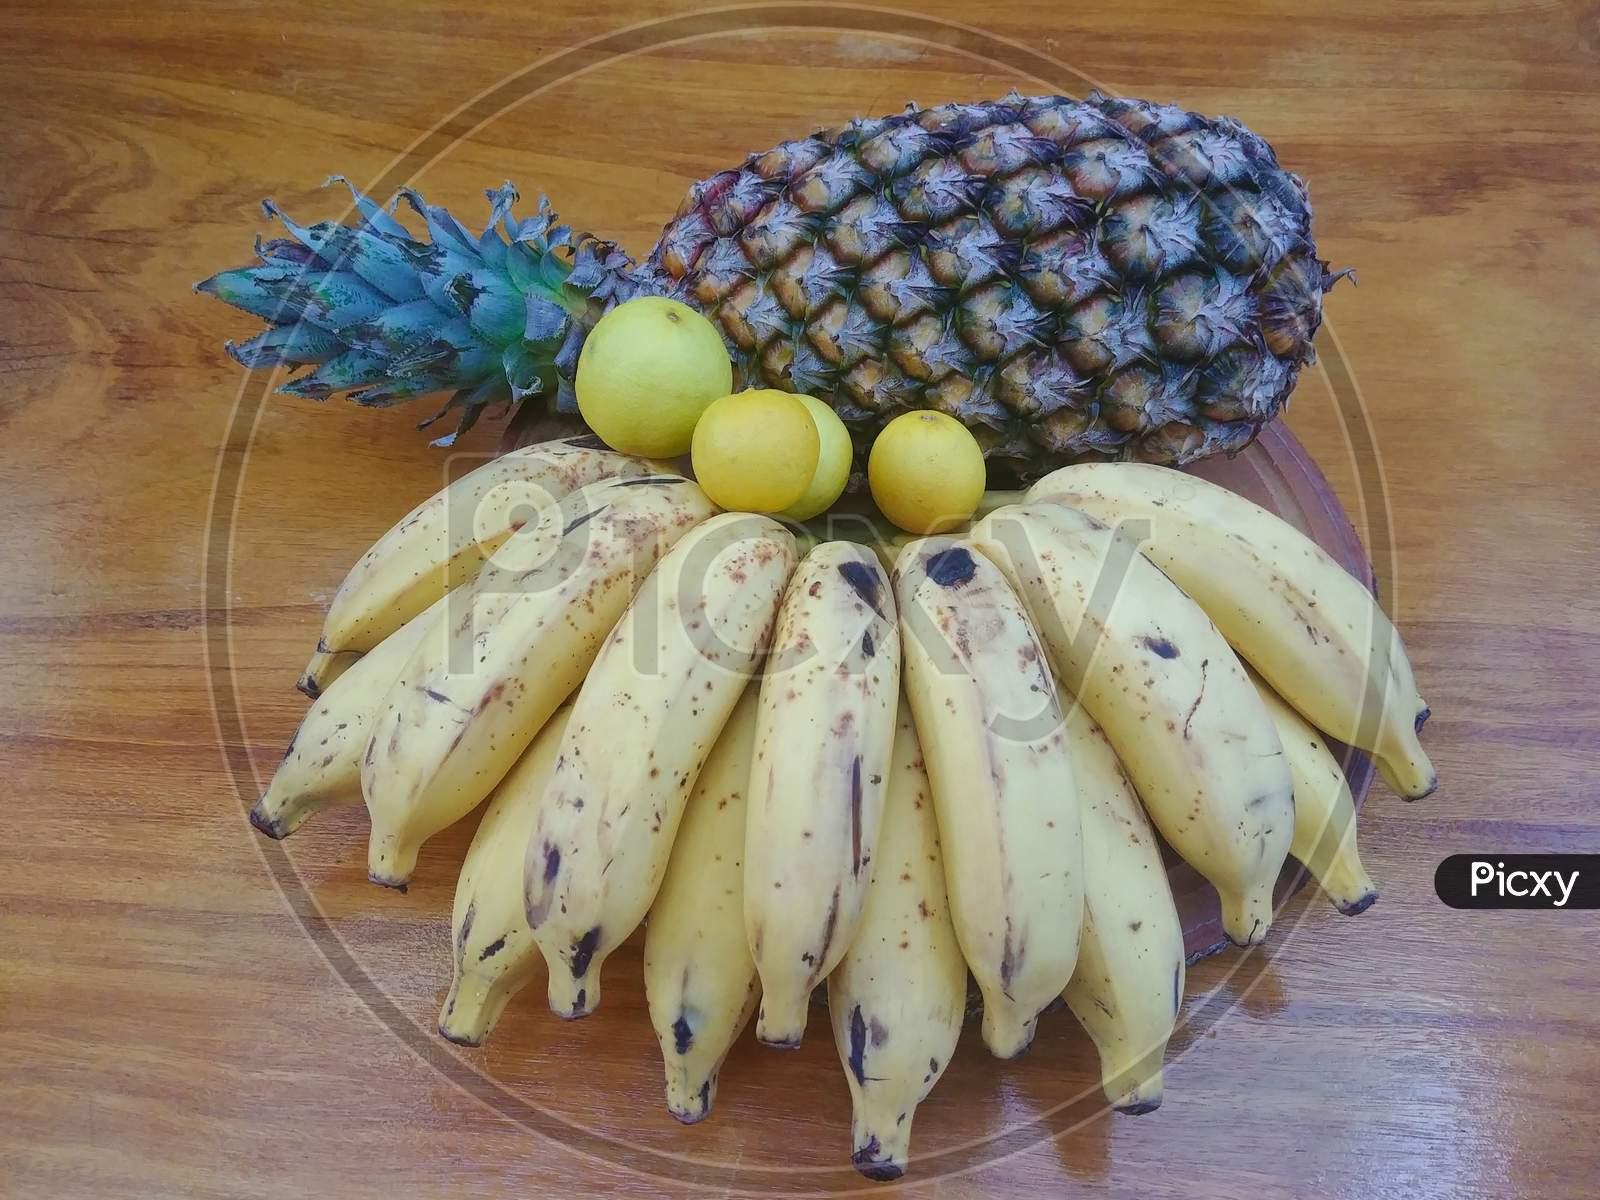 Pineapple, Bananas and Lemons on a wooden table